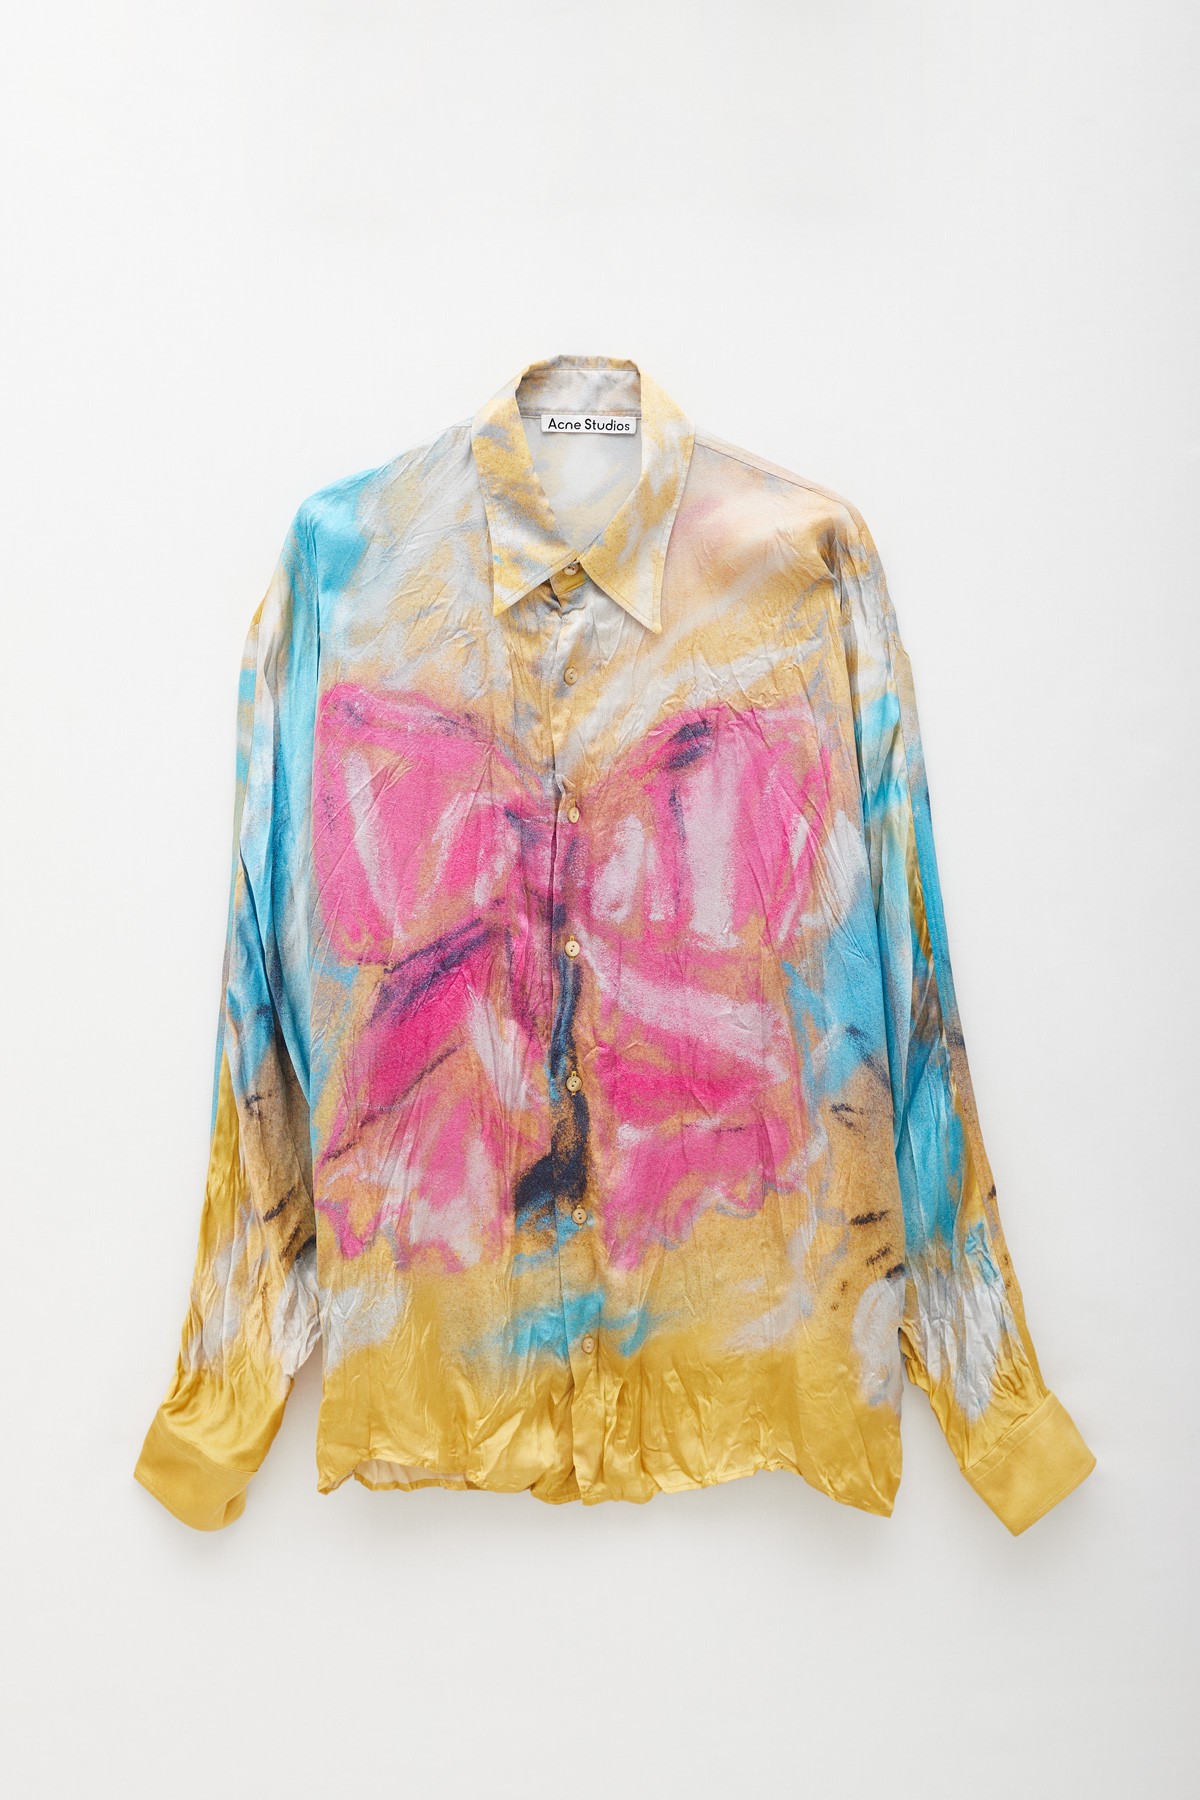 ACNE STUDIOS STRAW YELLOW PINK BUTTON-UP PRINTED SHIRT IAMNUE